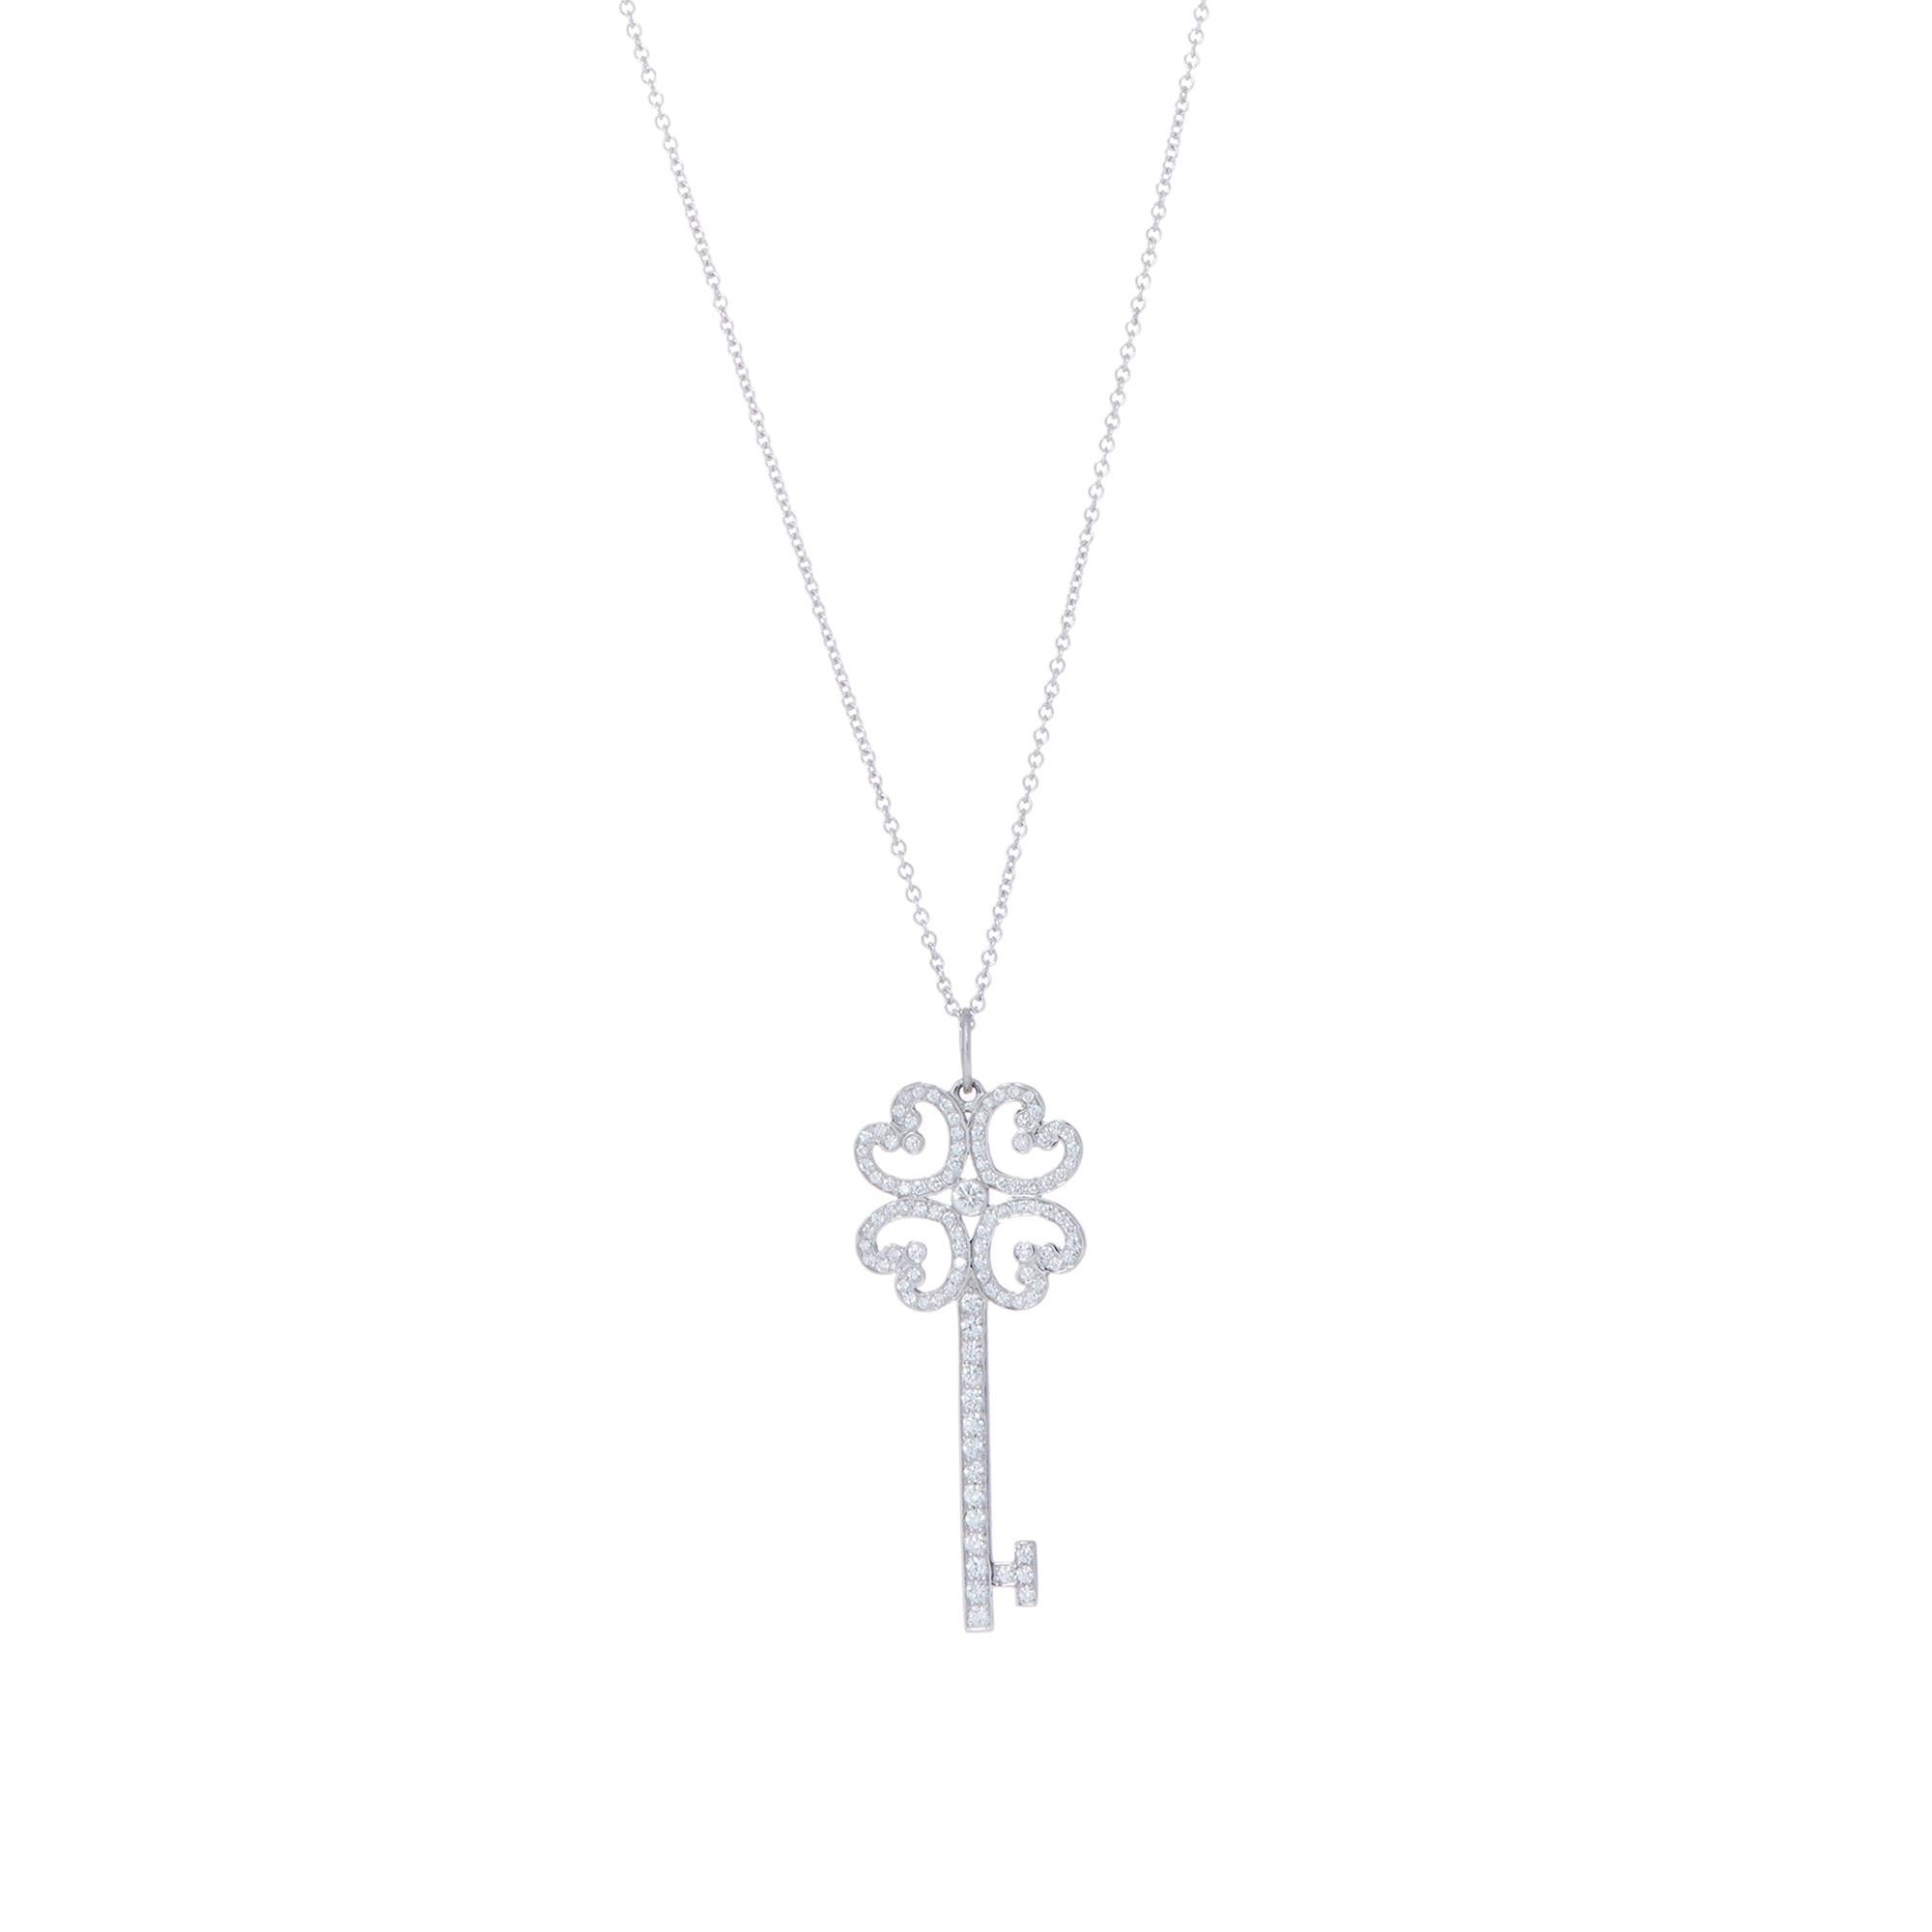 Authentic Tiffany & Co. Quatra Heart pendant from the Tiffany Keys collection. Crafted in platinum, the top of the key is composed of four pave set hearts surrounding a bezel set round brilliant cut diamond. The length of the key is also pave set